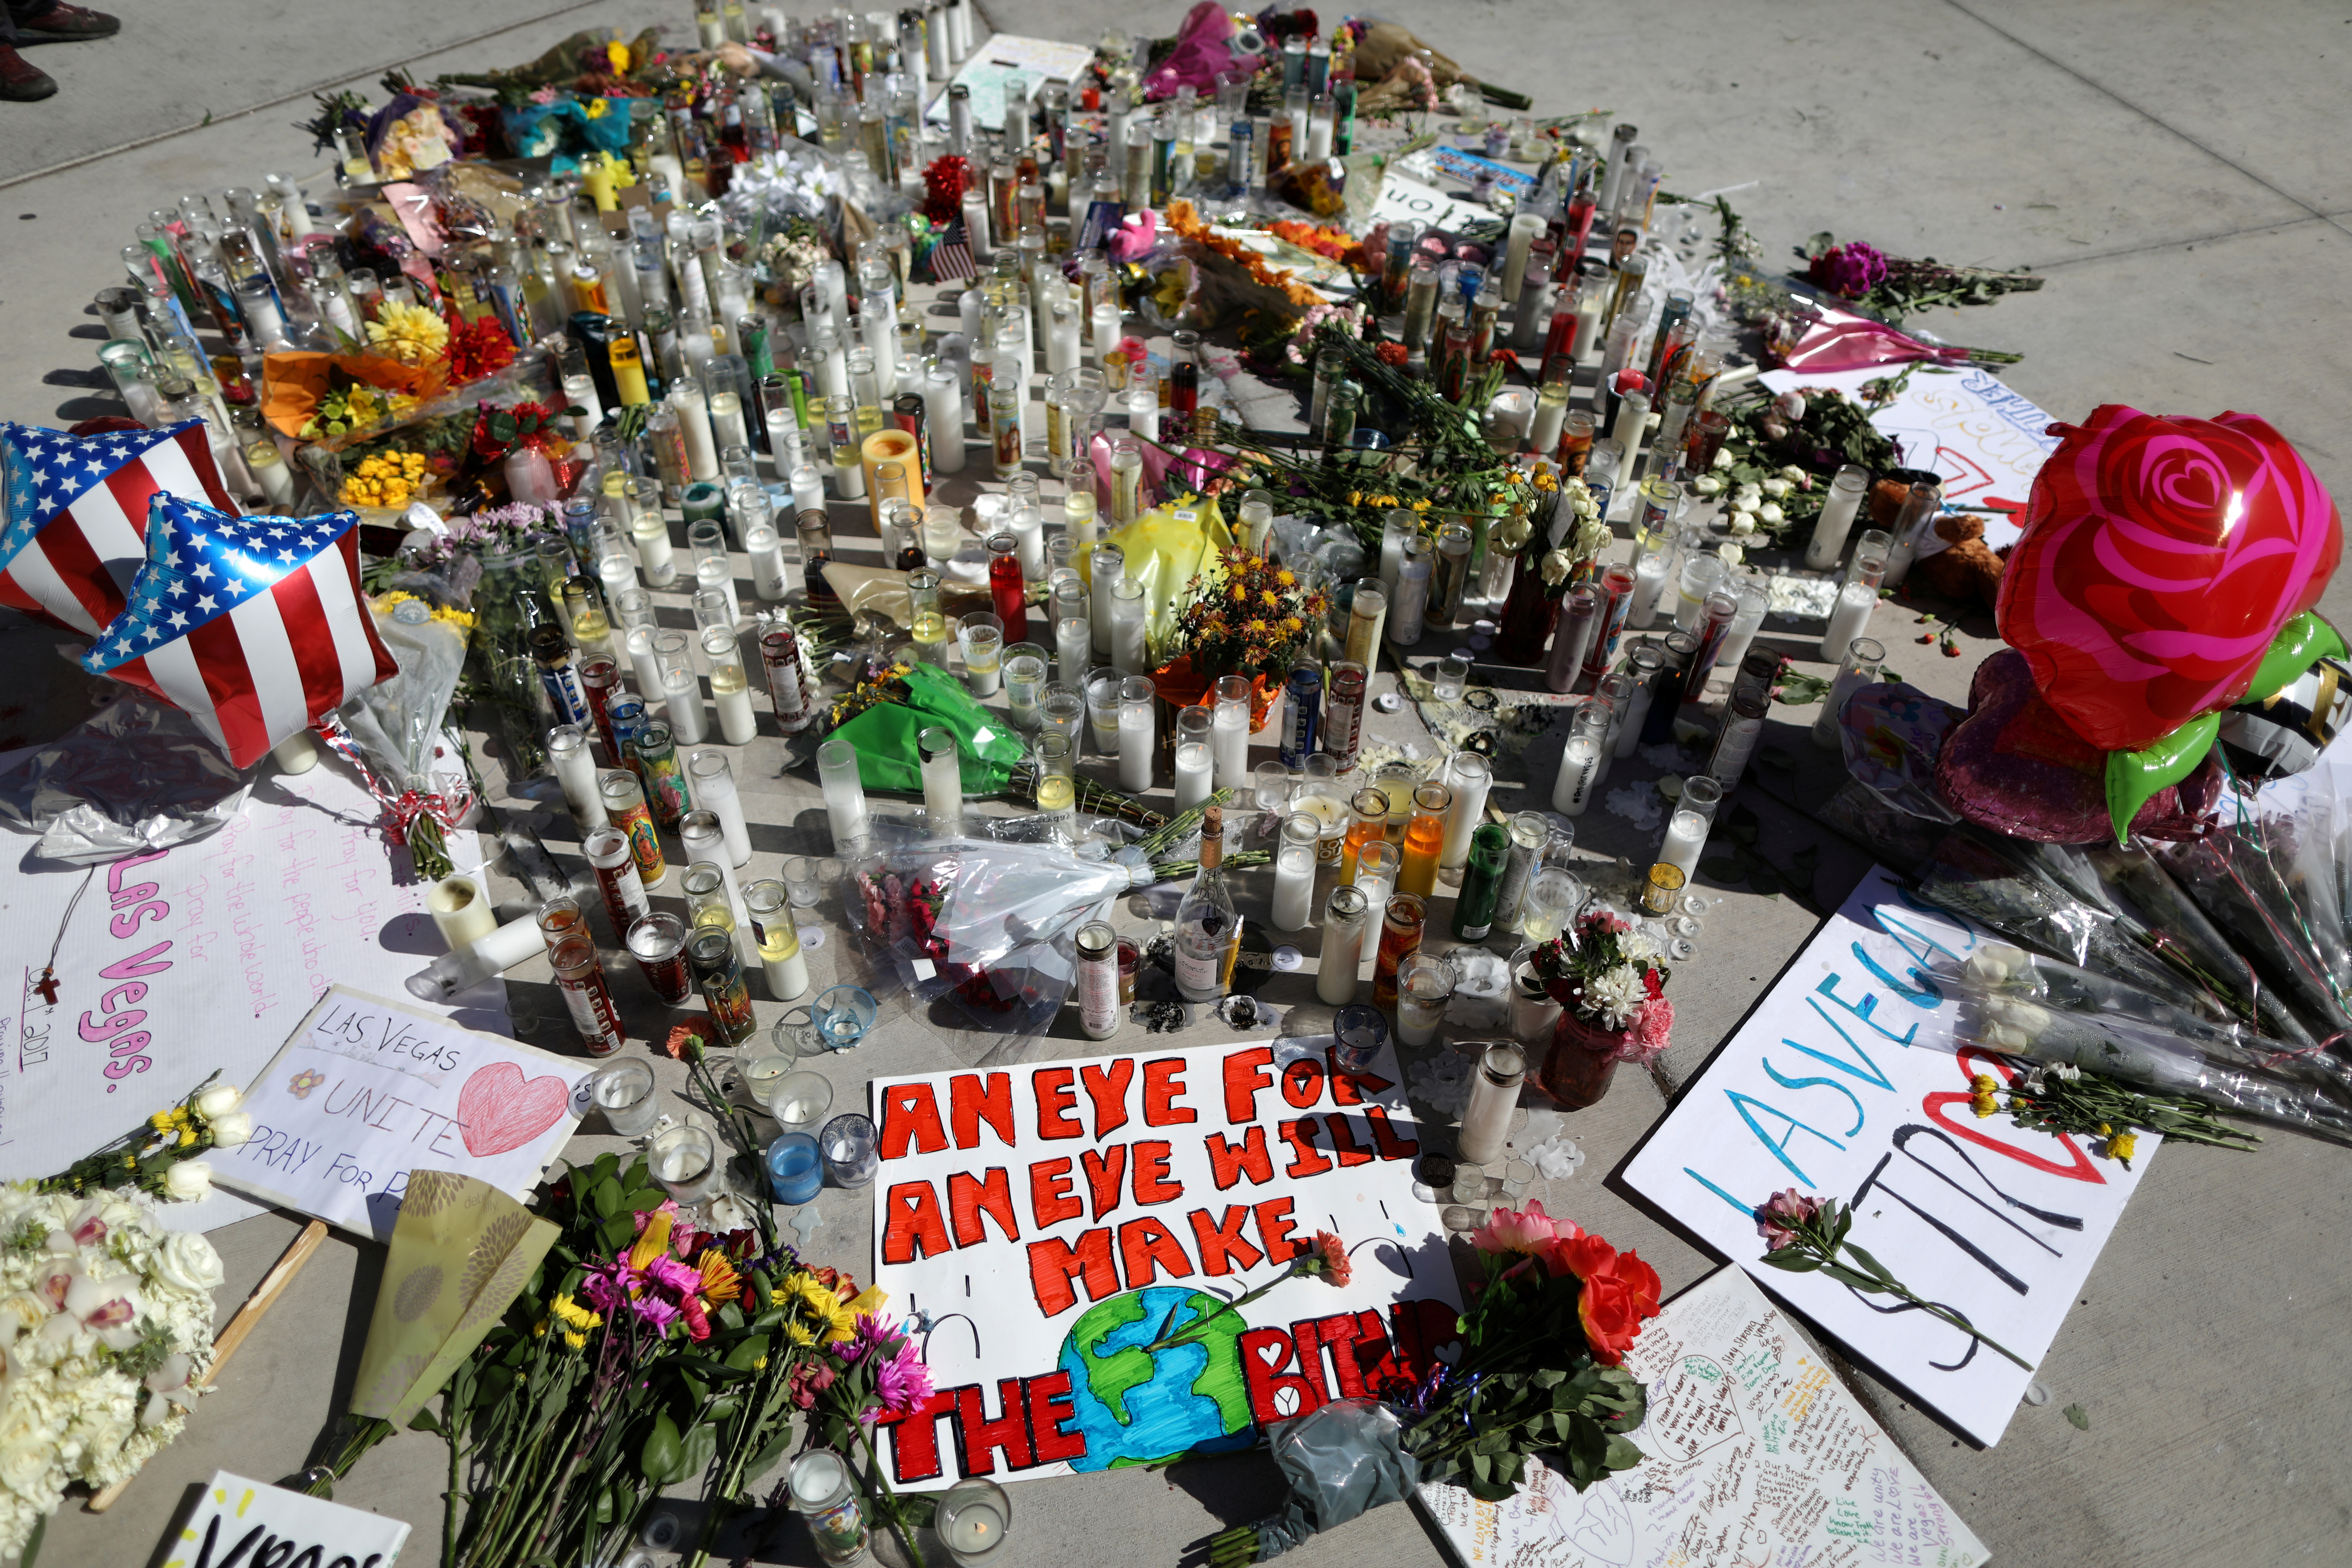 A makeshift memorial is seen on the Las Vegas Strip for victims of the Route 91 music festival mass shooting next to the Mandalay Bay Resort and Casino in Las Vegas, Nevada, U.S. October 3, 2017. REUTERS/Lucy Nicholson